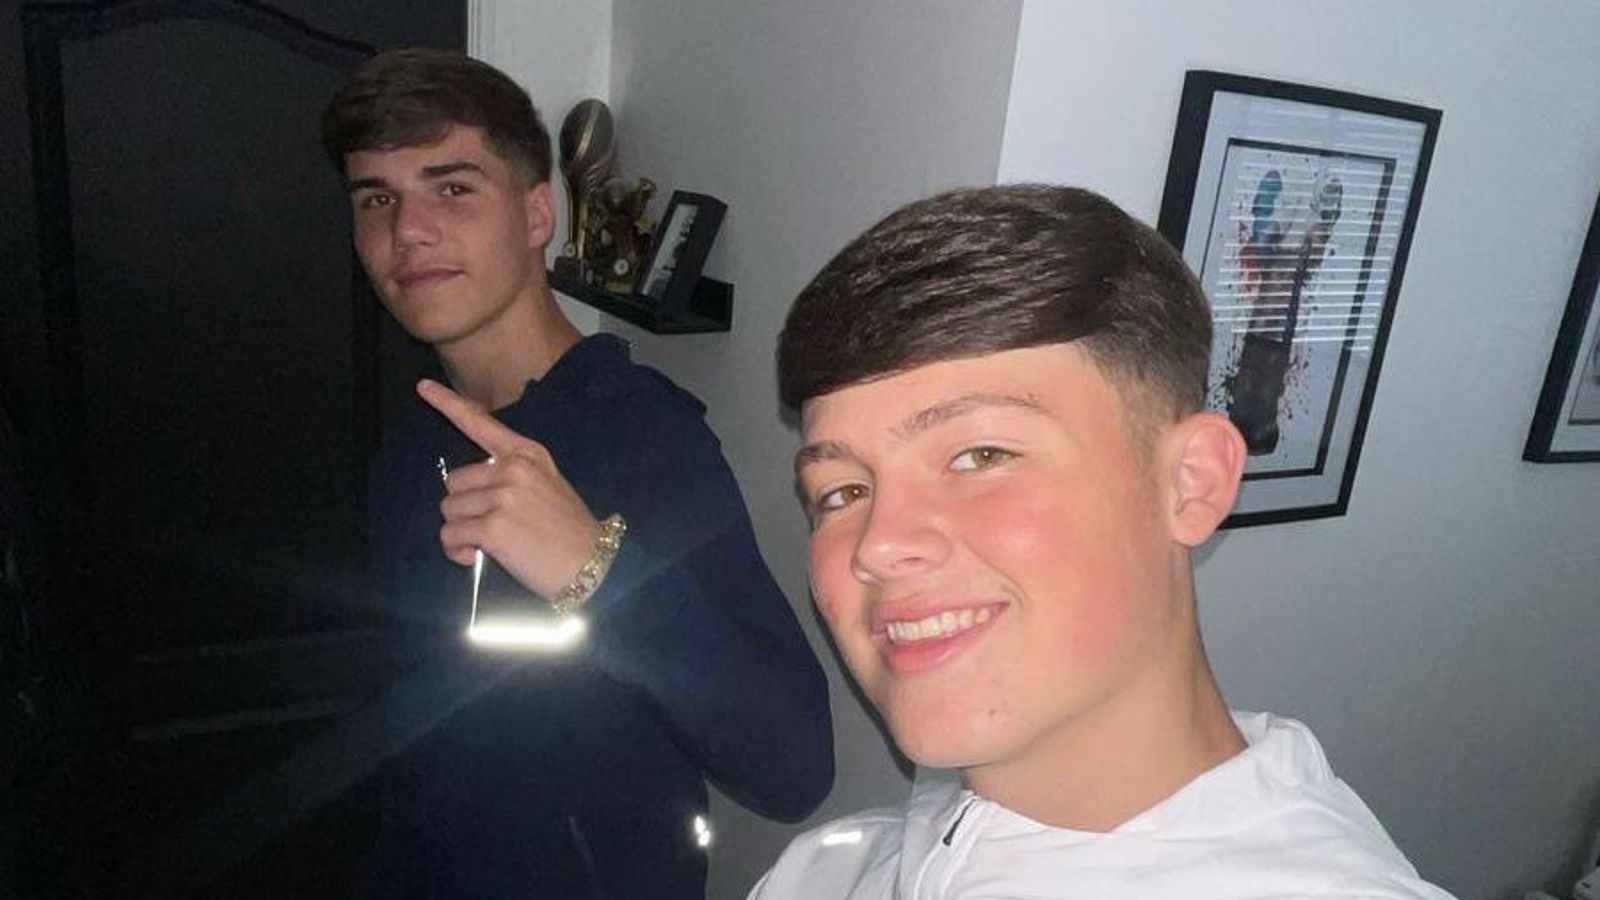 Teenage boys described as 'angels' after leaping onto tracks to save man with seconds to spare